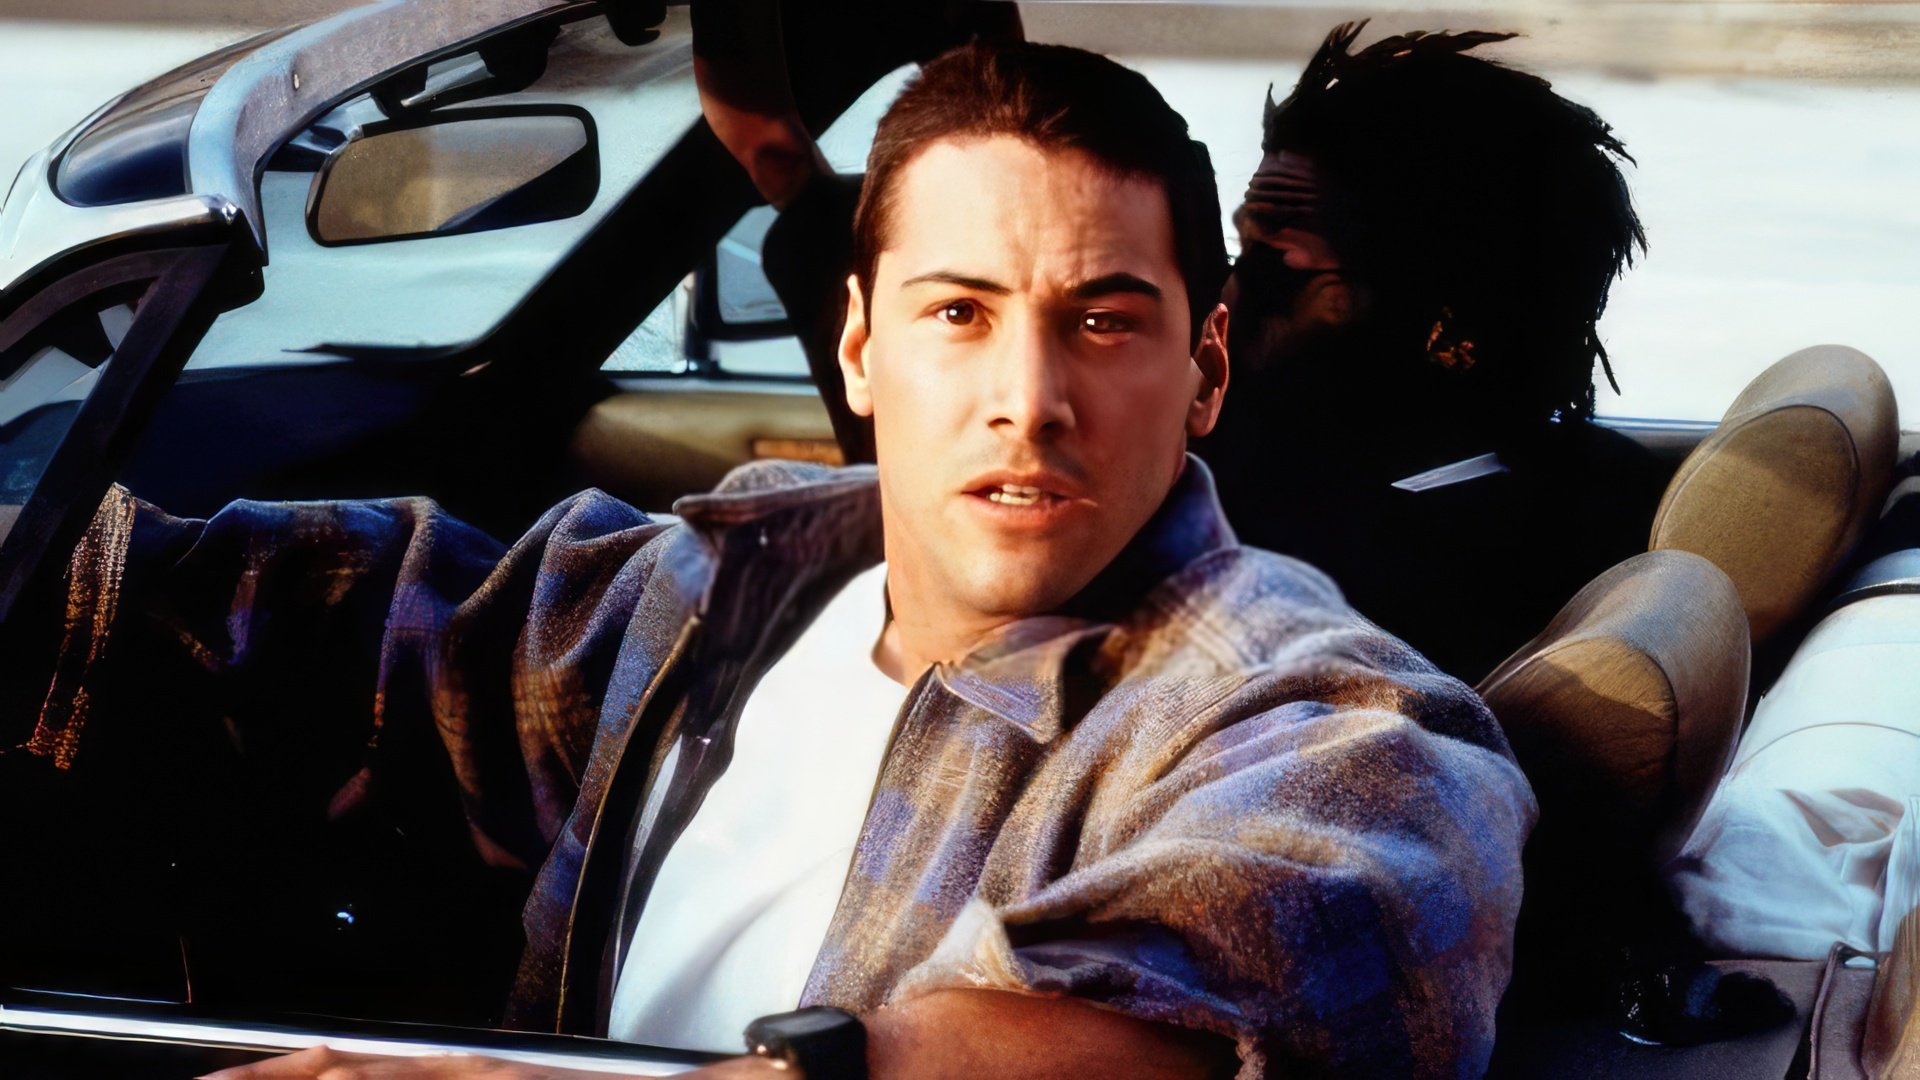 First action thriller in Keanu Reeves’ career (“Speed”, 1994)